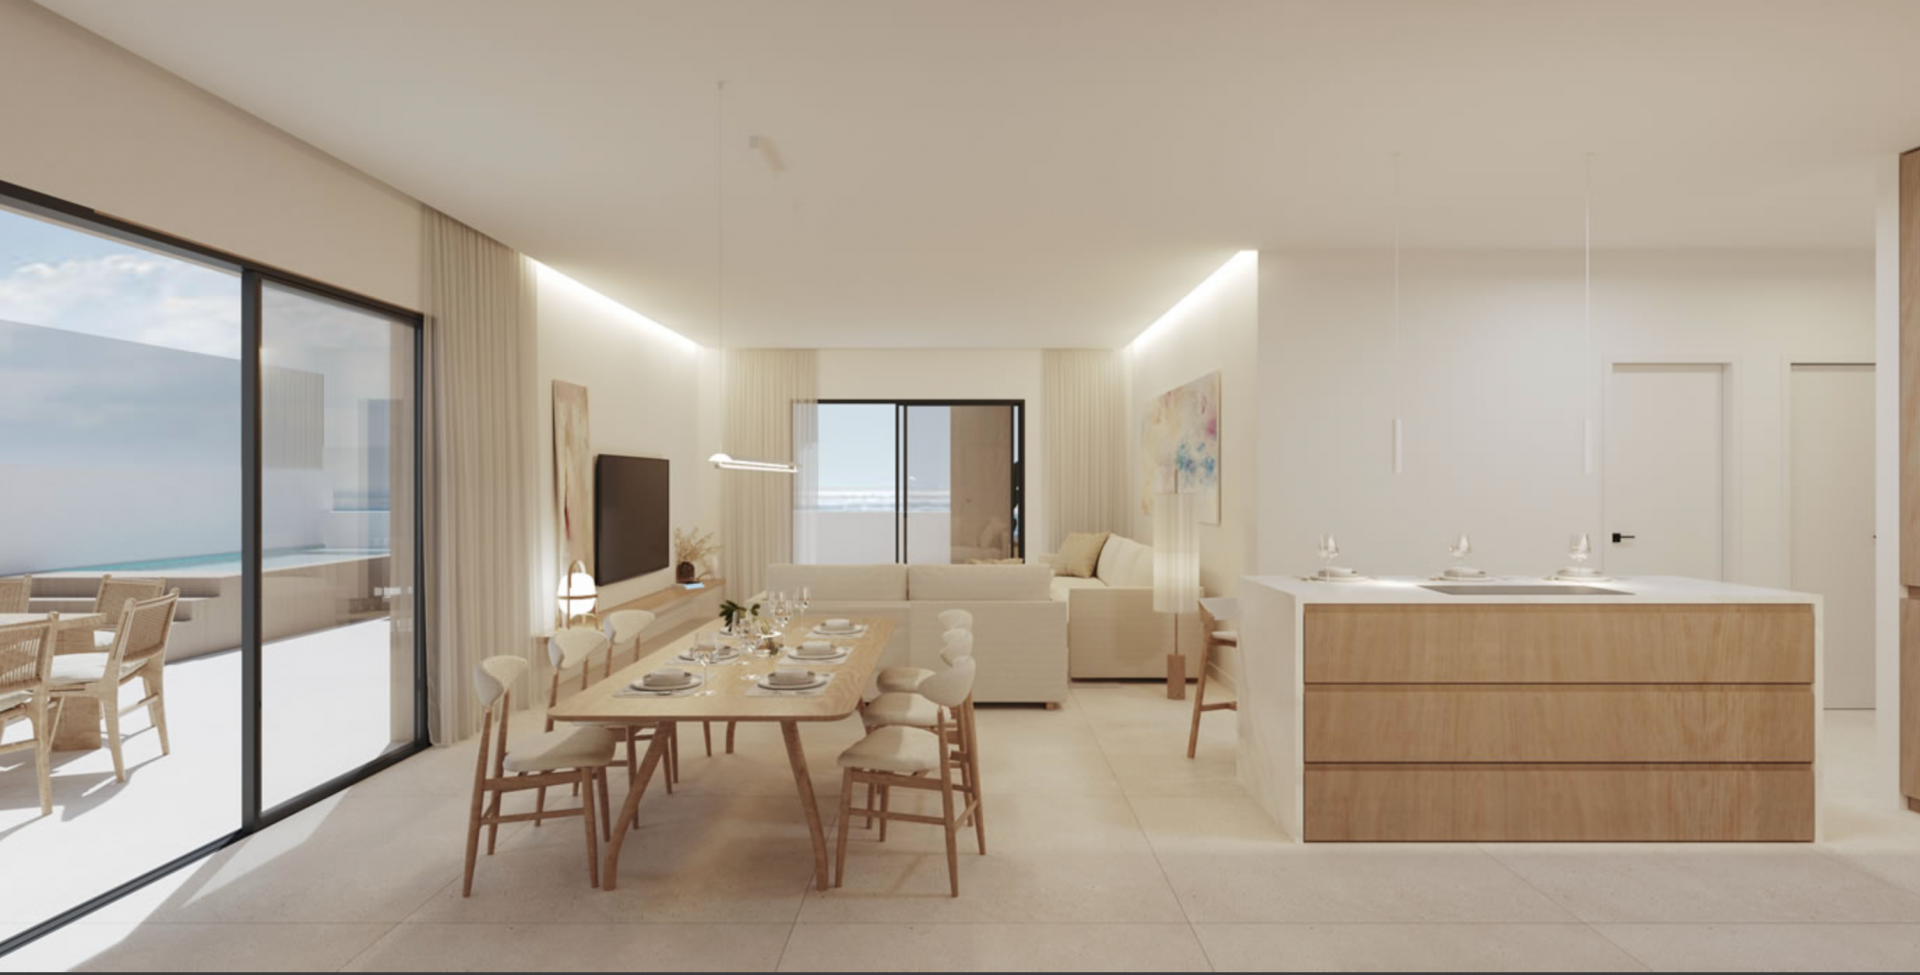 Newly- built residential complex consisting of thirty five, 2 and 3 bedroom apartments in the heart of San Pedro Alcántara